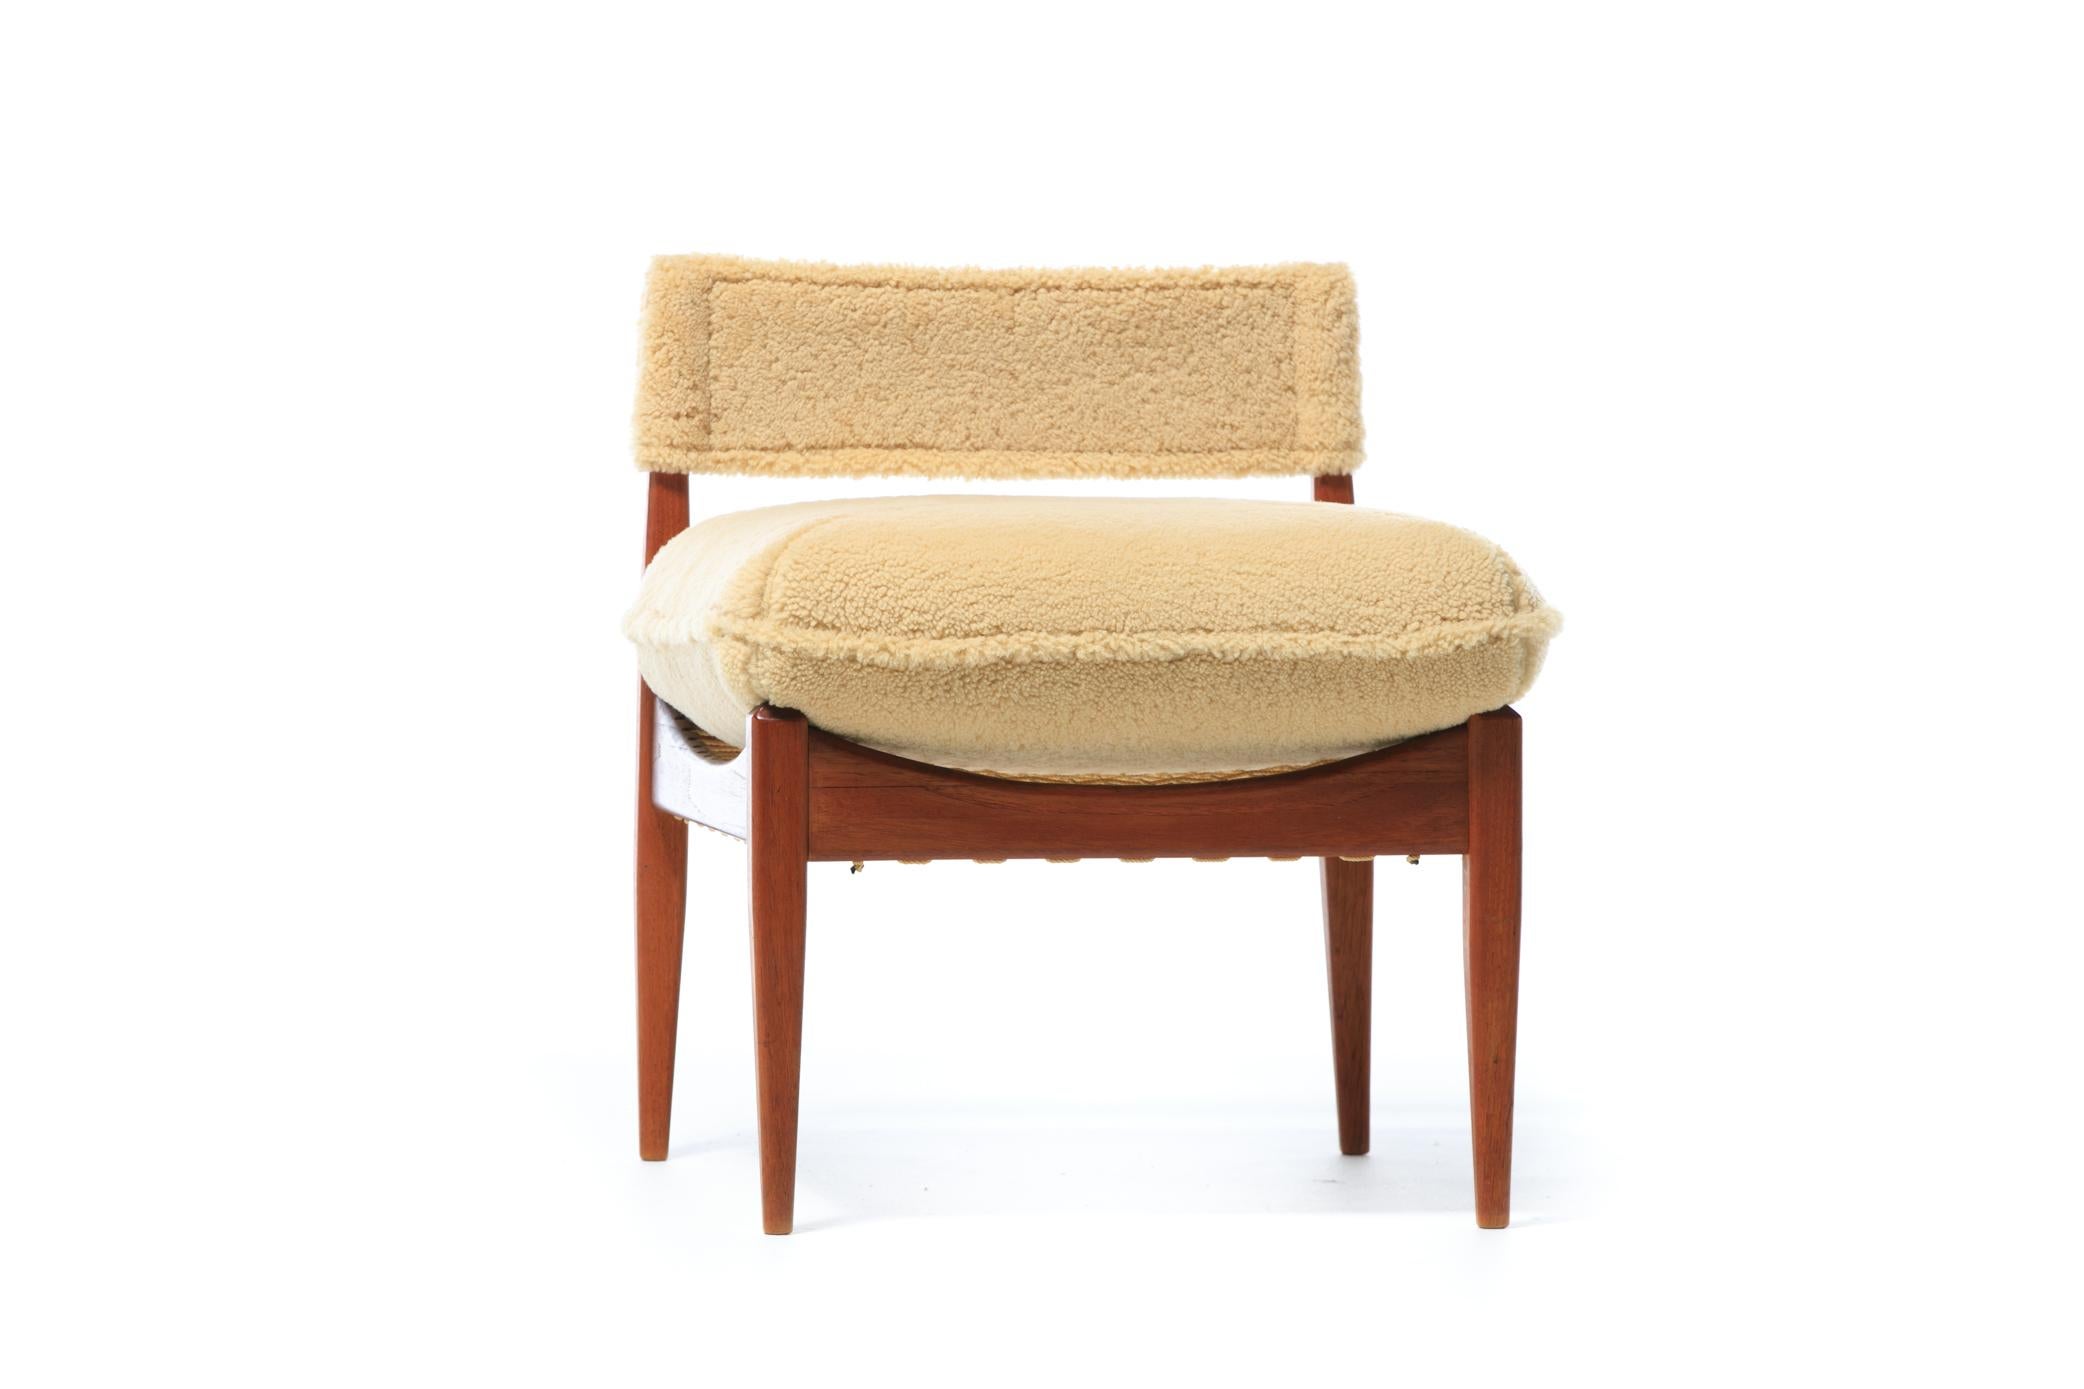 Sheepskin Danish Modern Pair of Kristian Vedel Style Lounge Chairs in Palomino Shearling For Sale